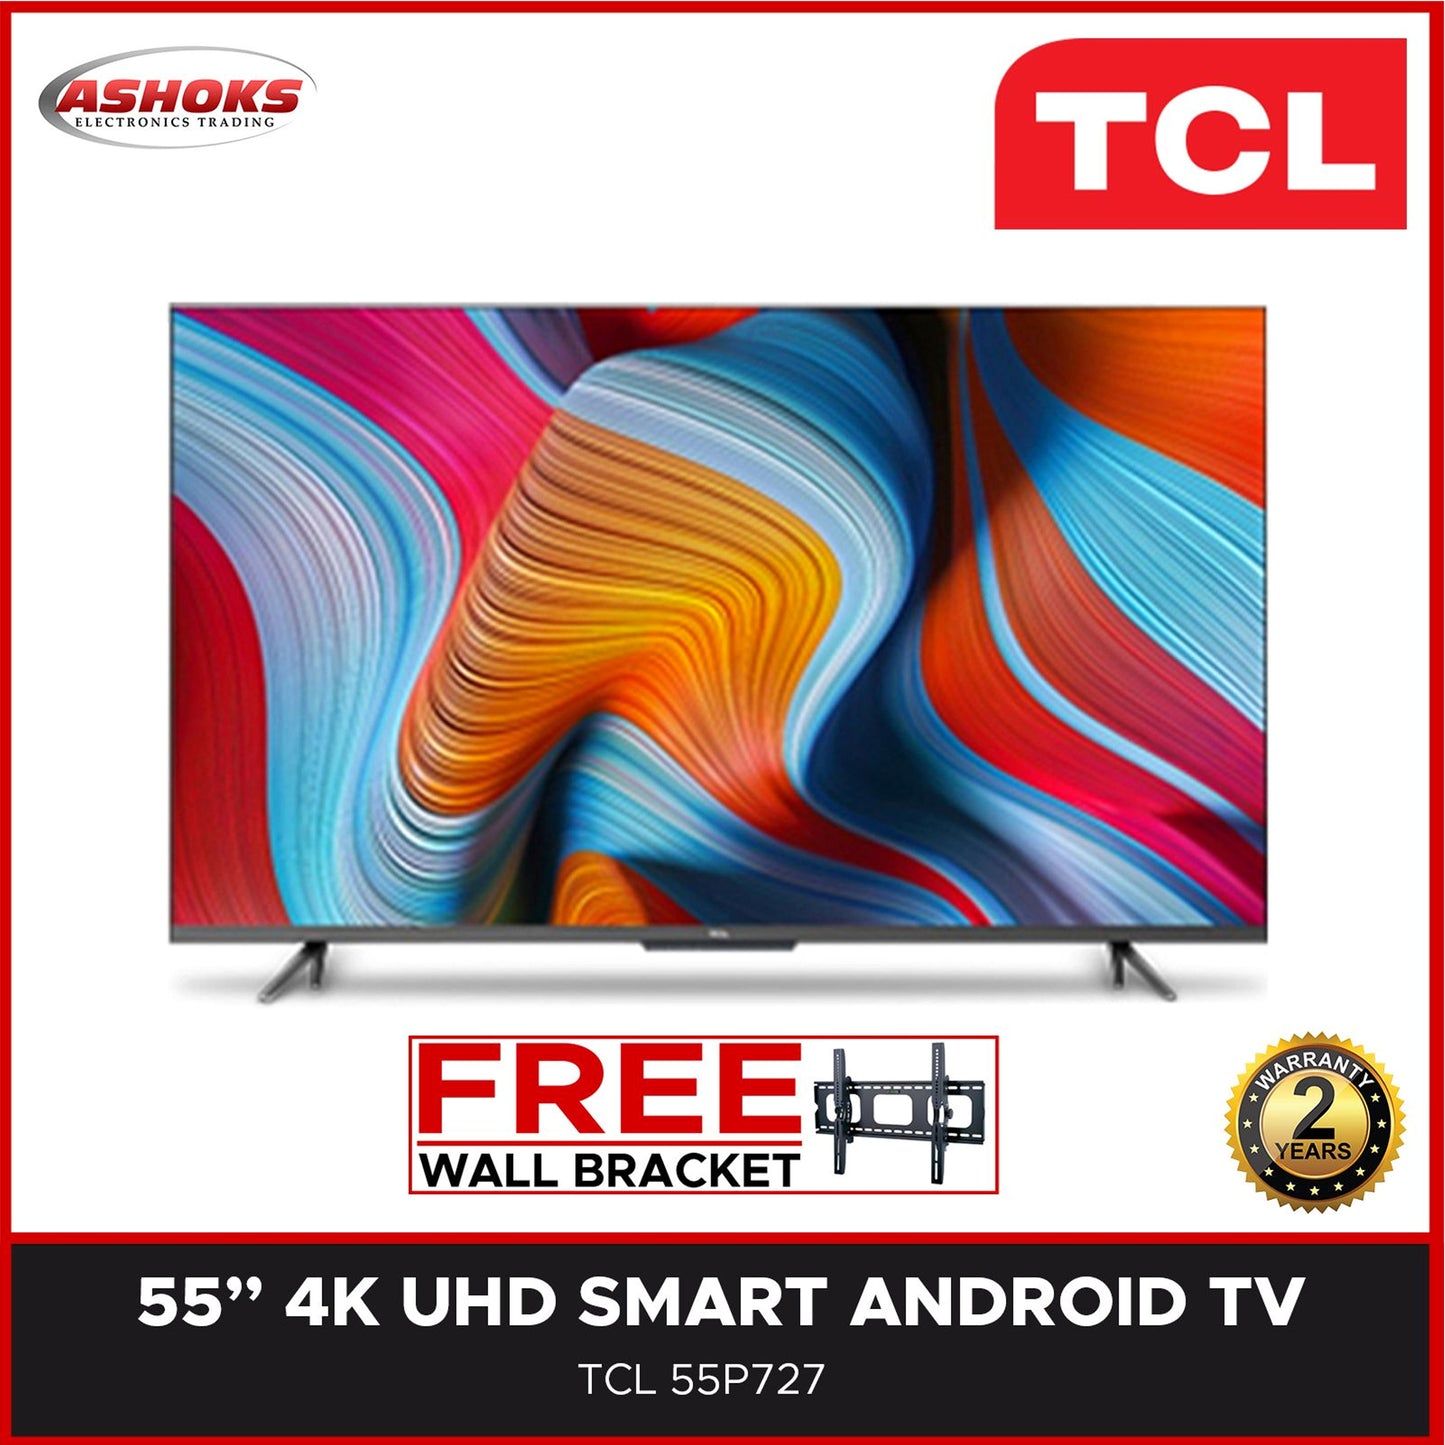 TCL 55P727 4K UHD Smart Android TV  / TCL 55 inch LED TV / TCL ANDROID TV / 55 inch Smart TV / Smart TV / TCL